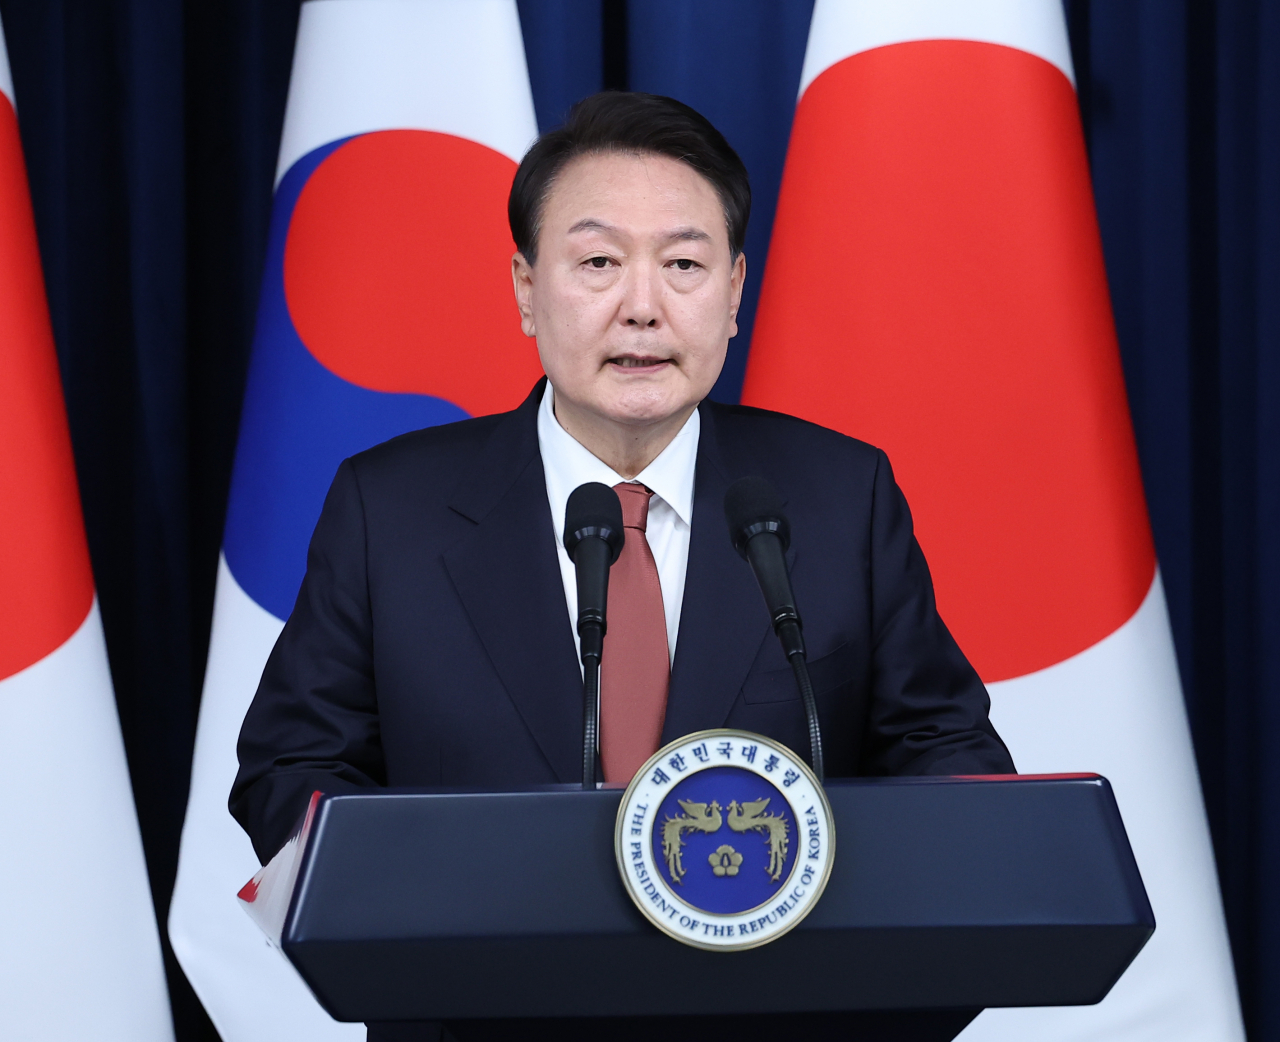 South Korean President Yoon Suk Yeol speaks during a joint press conference with Japanese Prime Minister Fumio Kishida after their talks at the presidential office in Seoul on Sunday. (Yonhap)